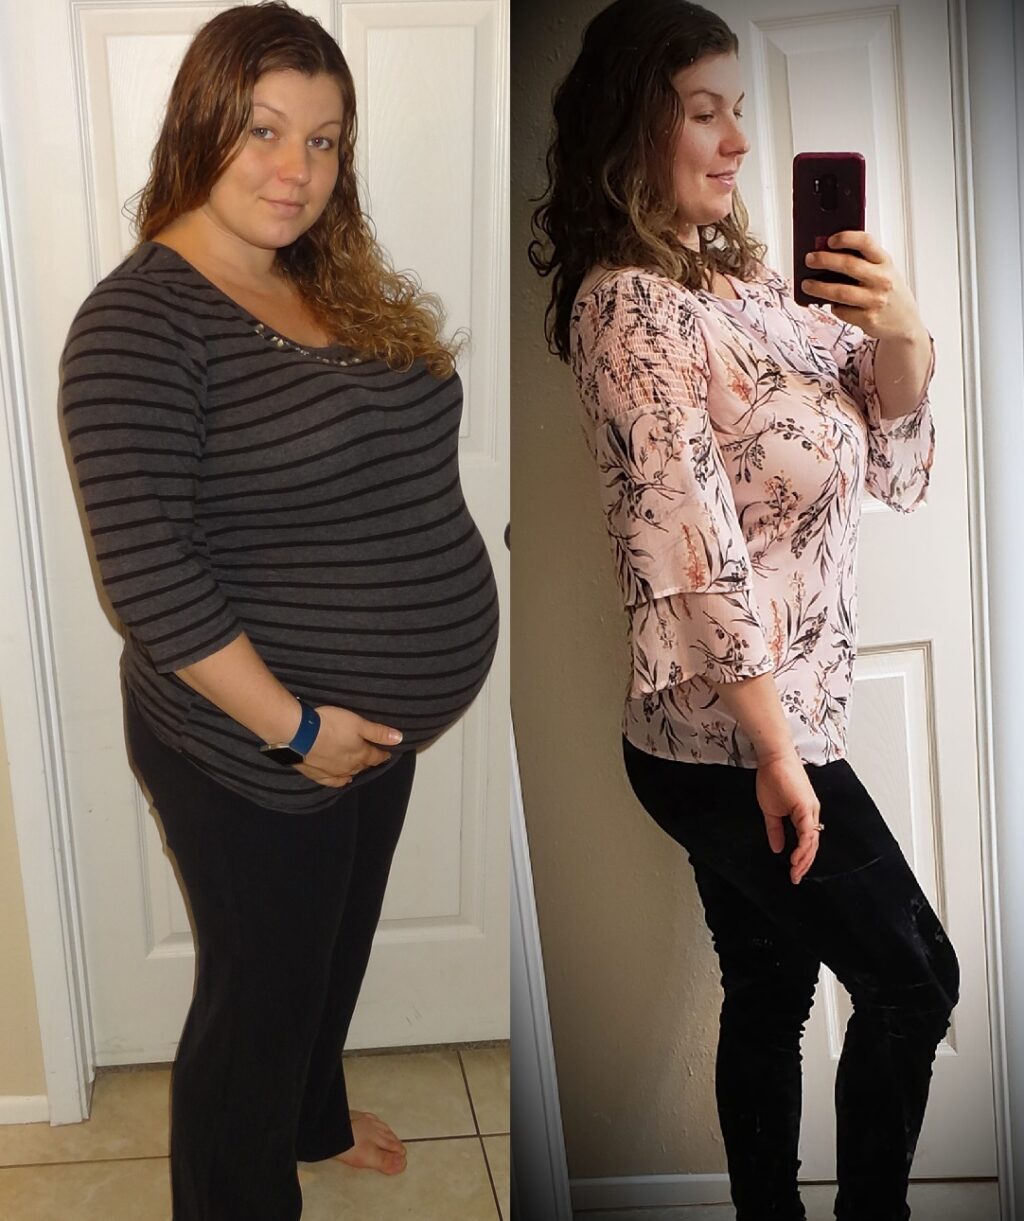 vegan-pregnancy-weight-loss-journey-story-kelly-gibson-athletics-post-partum